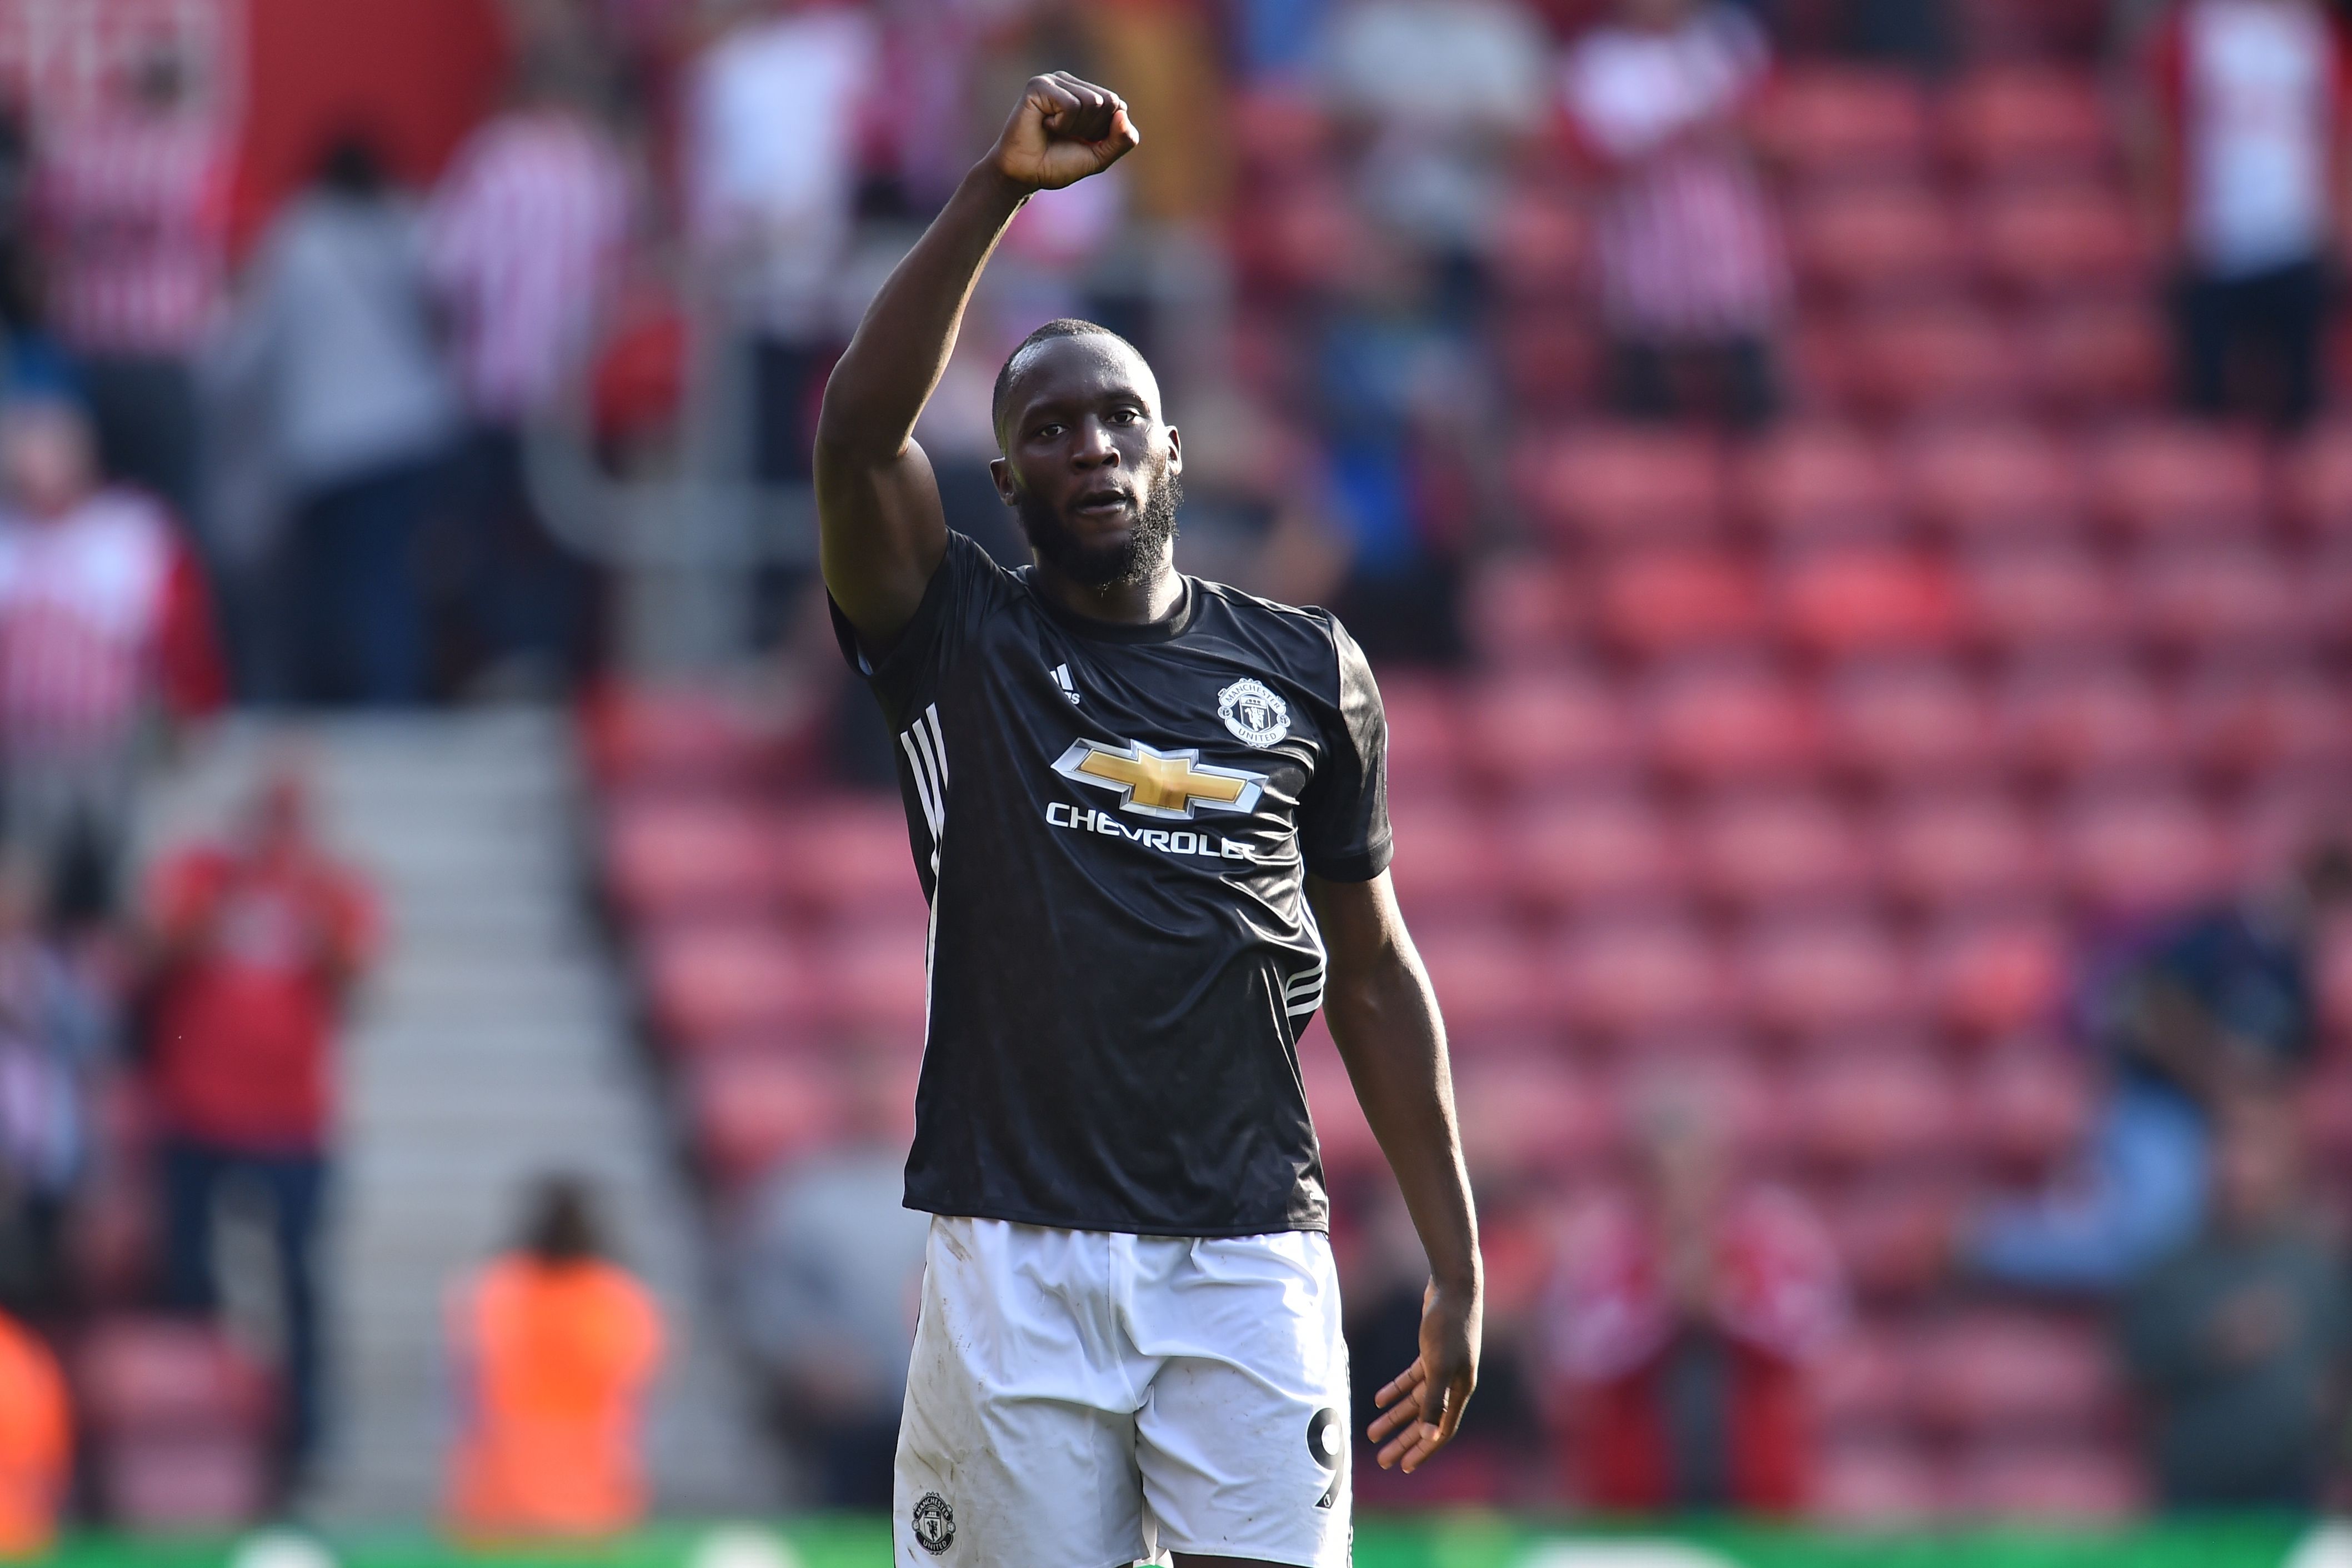 Manchester United's Belgian striker Romelu Lukaku gestures on the pitch after the English Premier League football match between Southampton and Manchester United at St Mary's Stadium in Southampton, southern England on September 23, 2017.
Manchester United won the game 1-0. / AFP PHOTO / Glyn KIRK / RESTRICTED TO EDITORIAL USE. No use with unauthorized audio, video, data, fixture lists, club/league logos or 'live' services. Online in-match use limited to 75 images, no video emulation. No use in betting, games or single club/league/player publications.  /         (Photo credit should read GLYN KIRK/AFP/Getty Images)